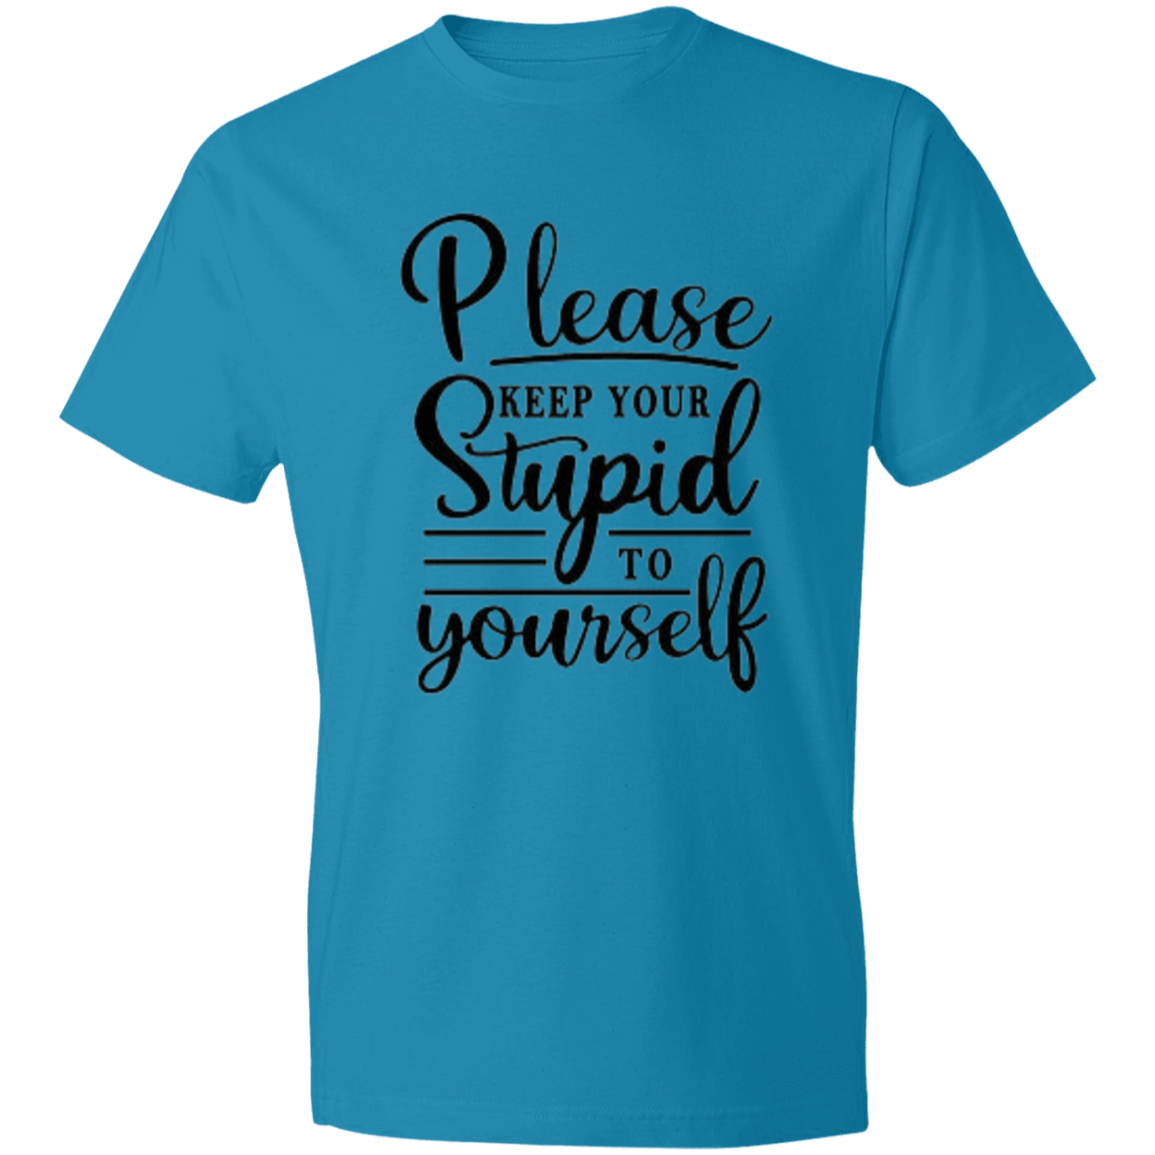 Please Keep Your Stupid to Yourself Unisex Lightweight T-Shirt 4.5 oz